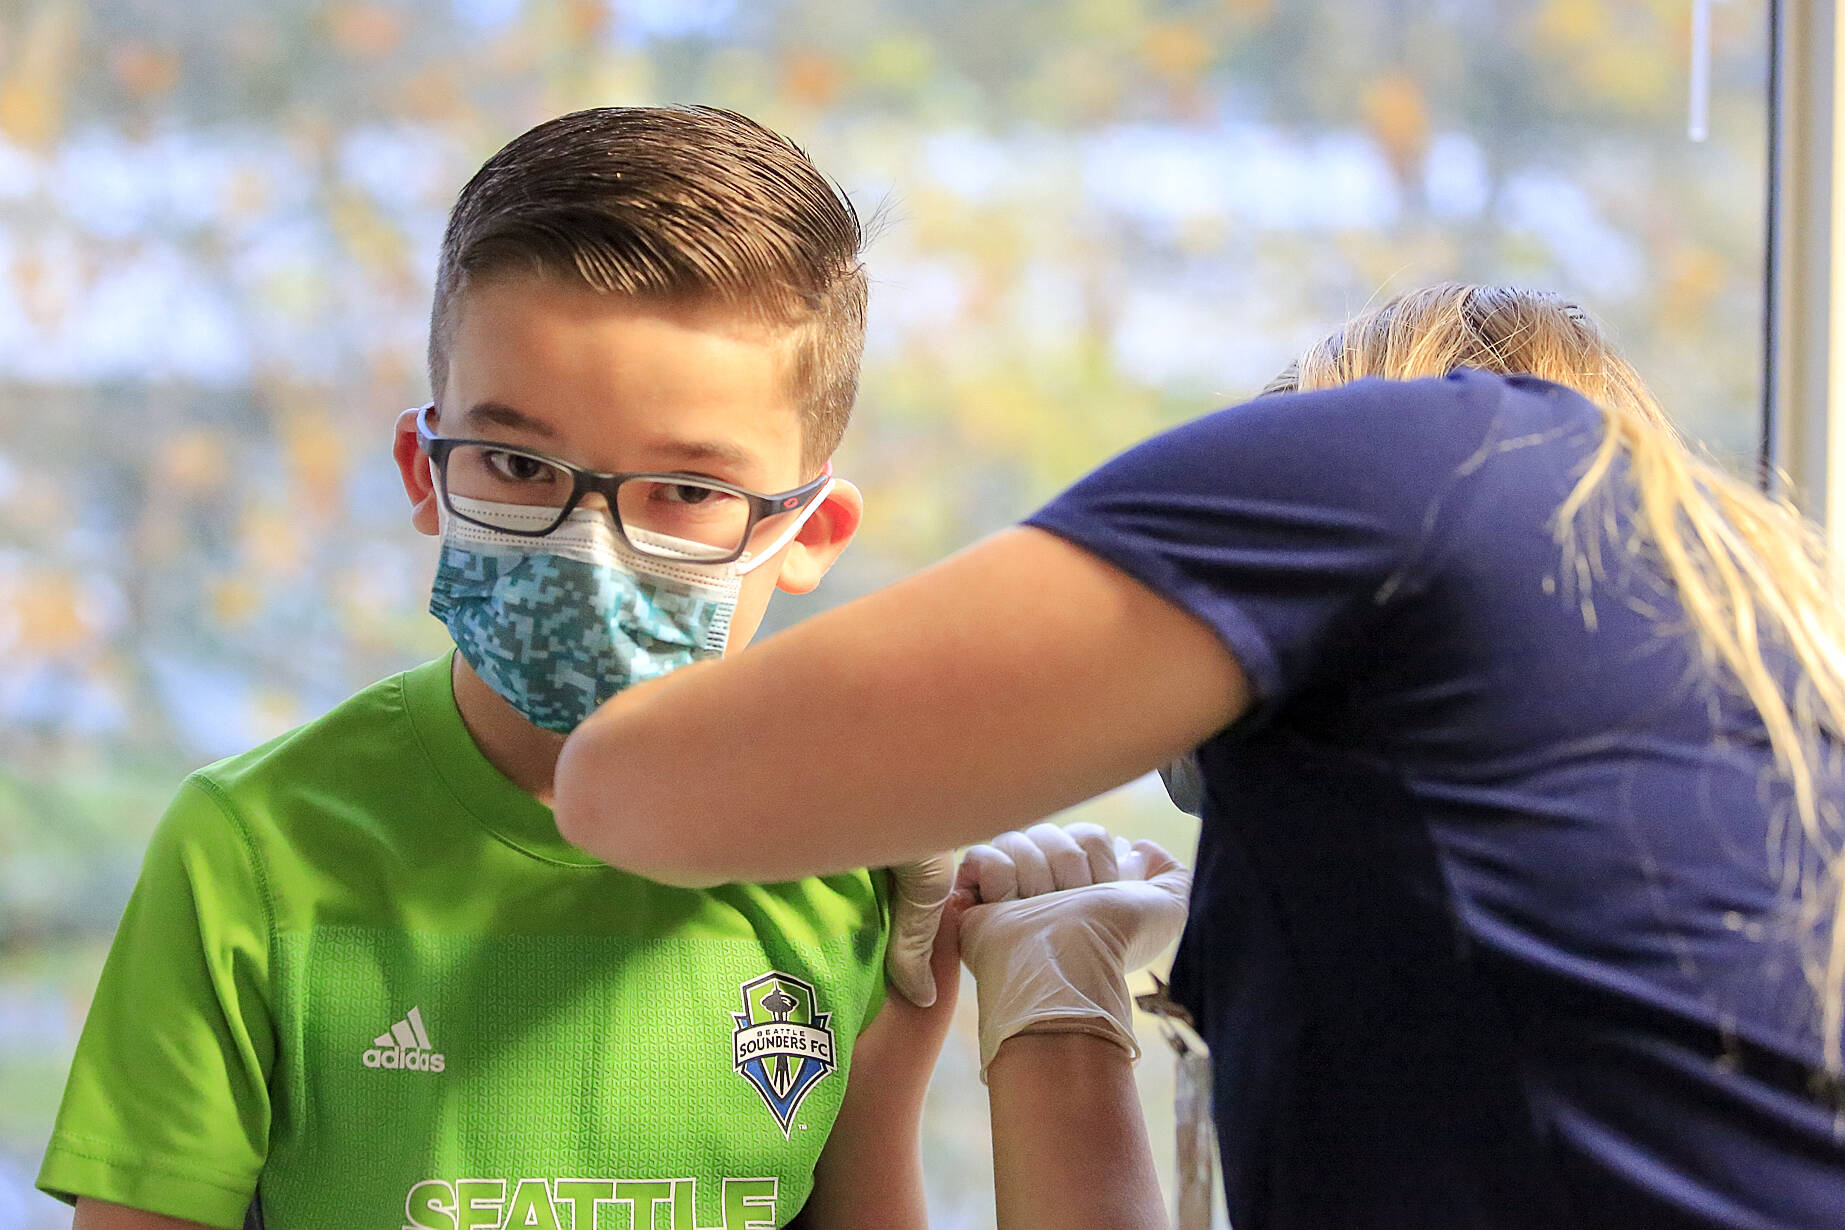 Kane Peterson, 9, gets a his COVID-19 vaccination Saturday morning in Everett, Washington on Nov. 6, 2021. Vaccination for children aged 5-11 are underway in the U.S. and a decision is pending from Health Canada. (Kevin Clark/Everett Herald)